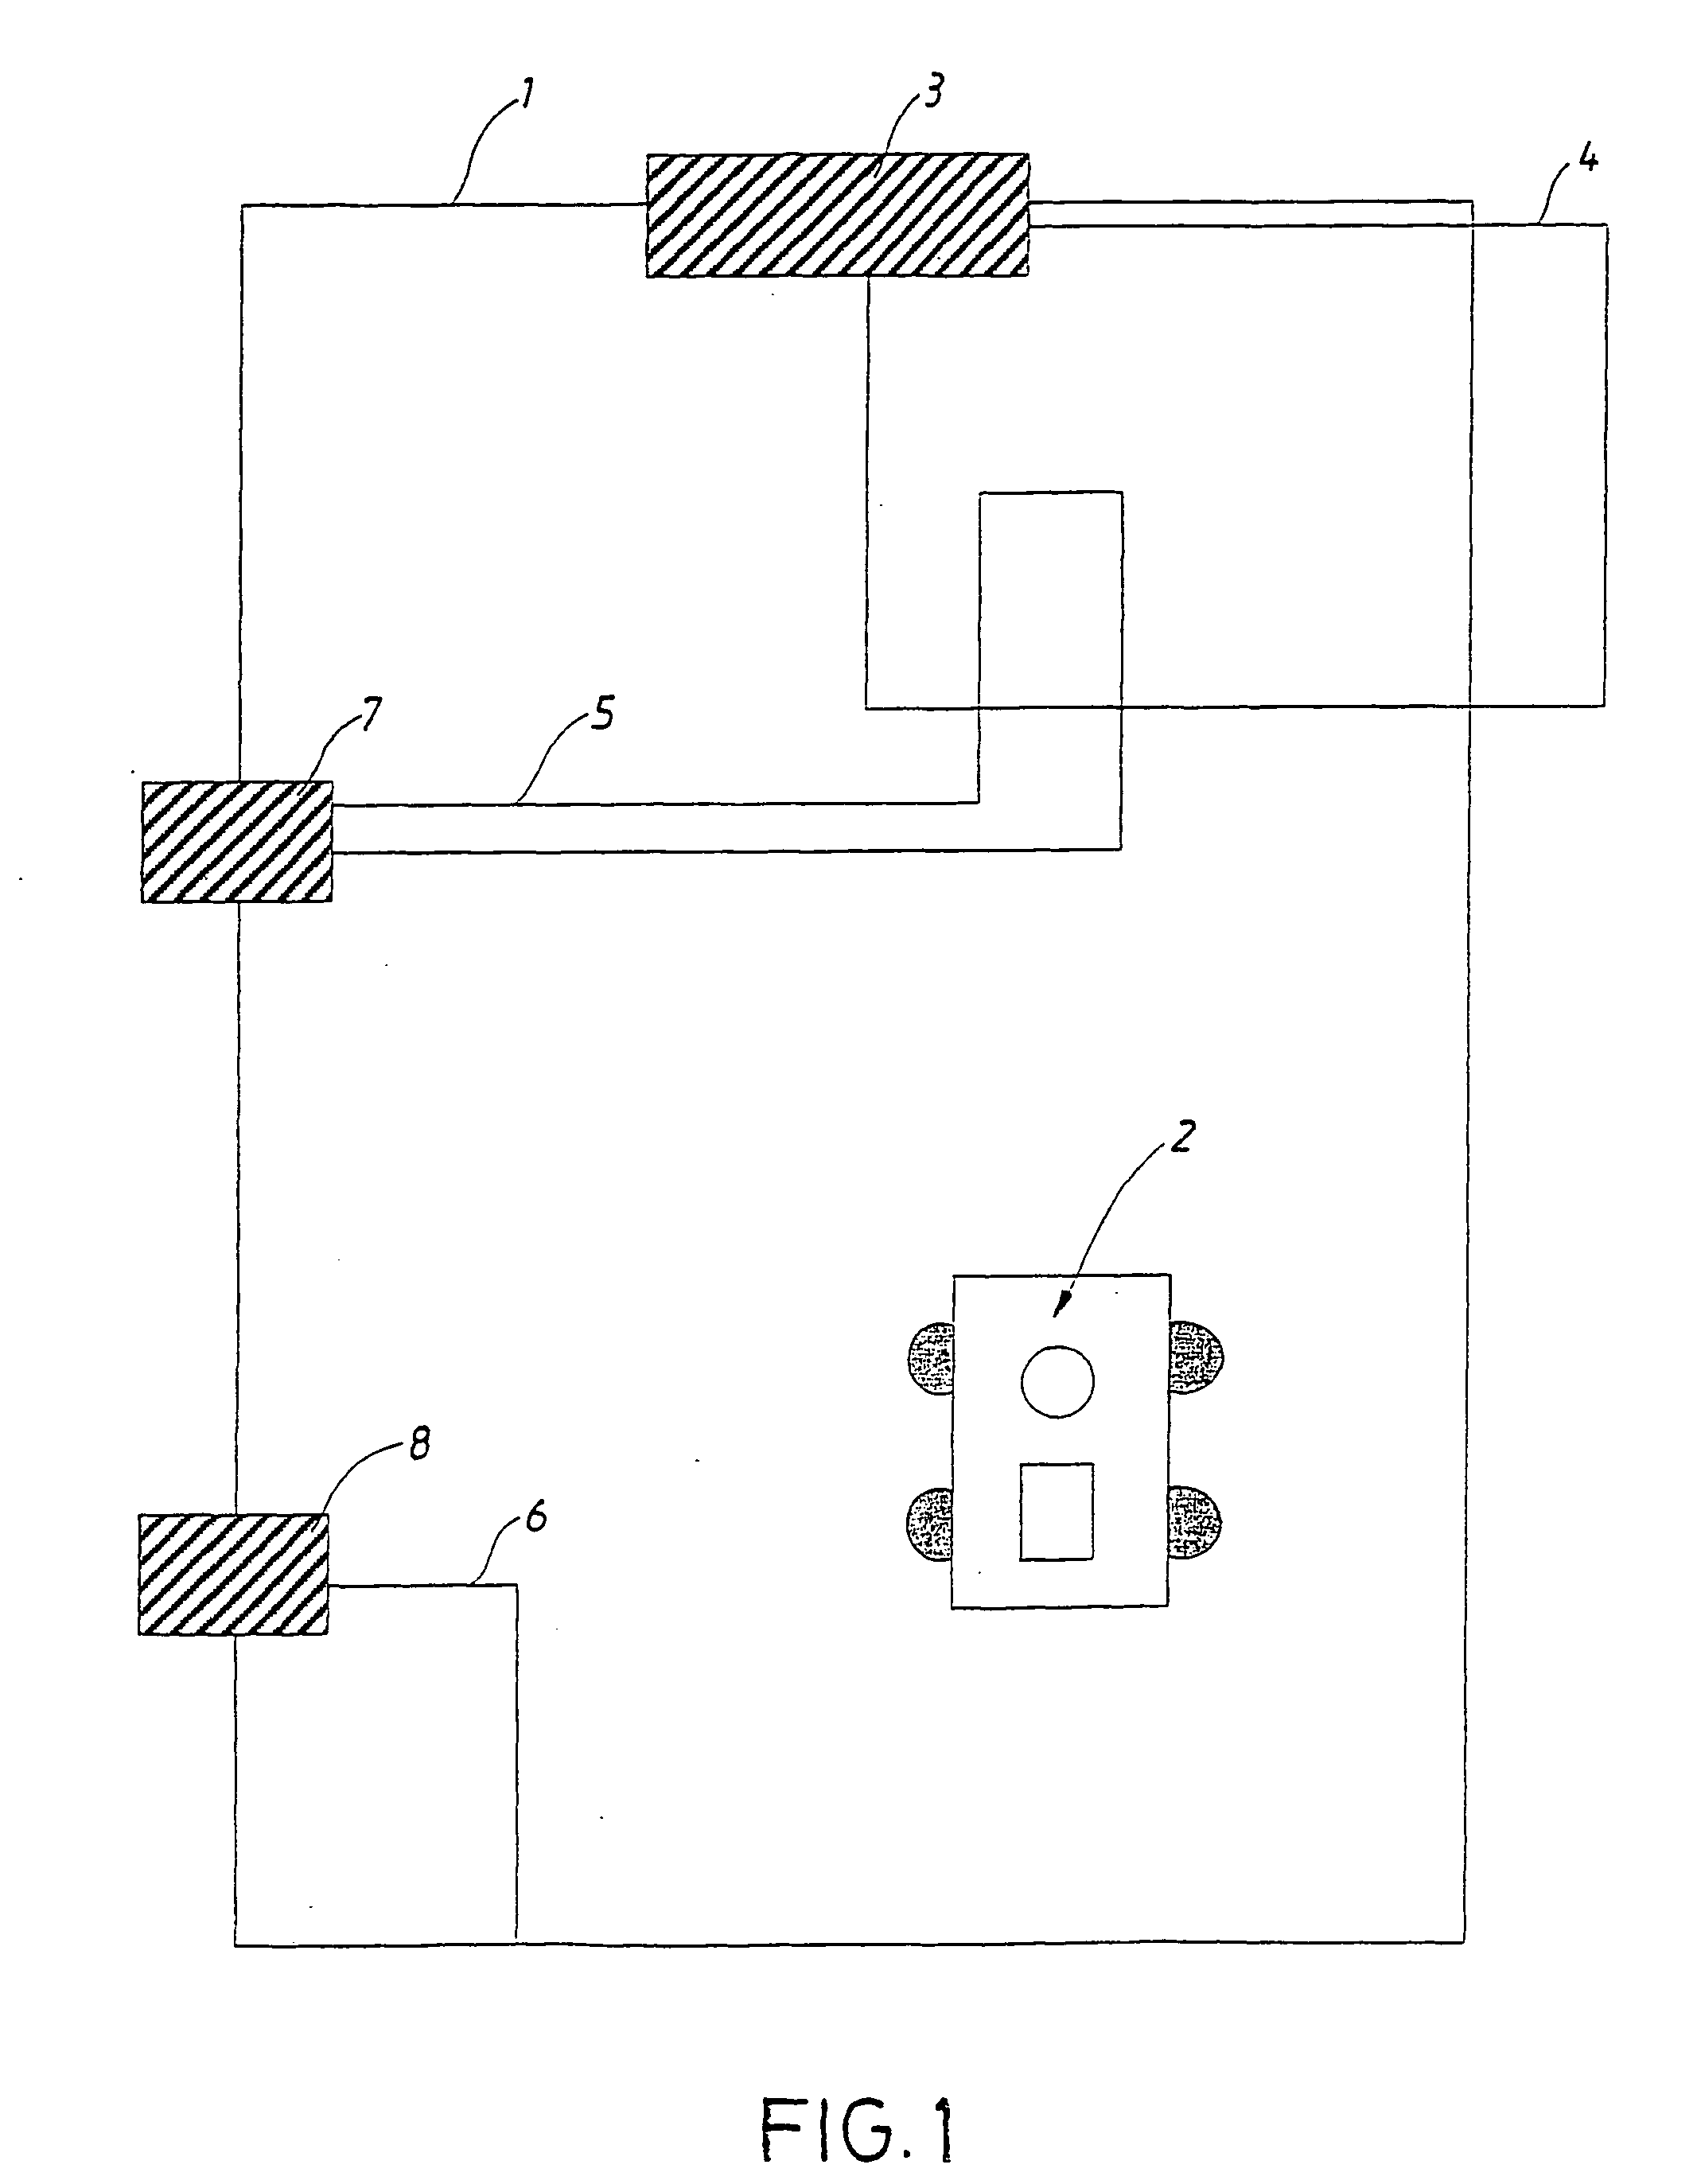 Electronic demarcating system